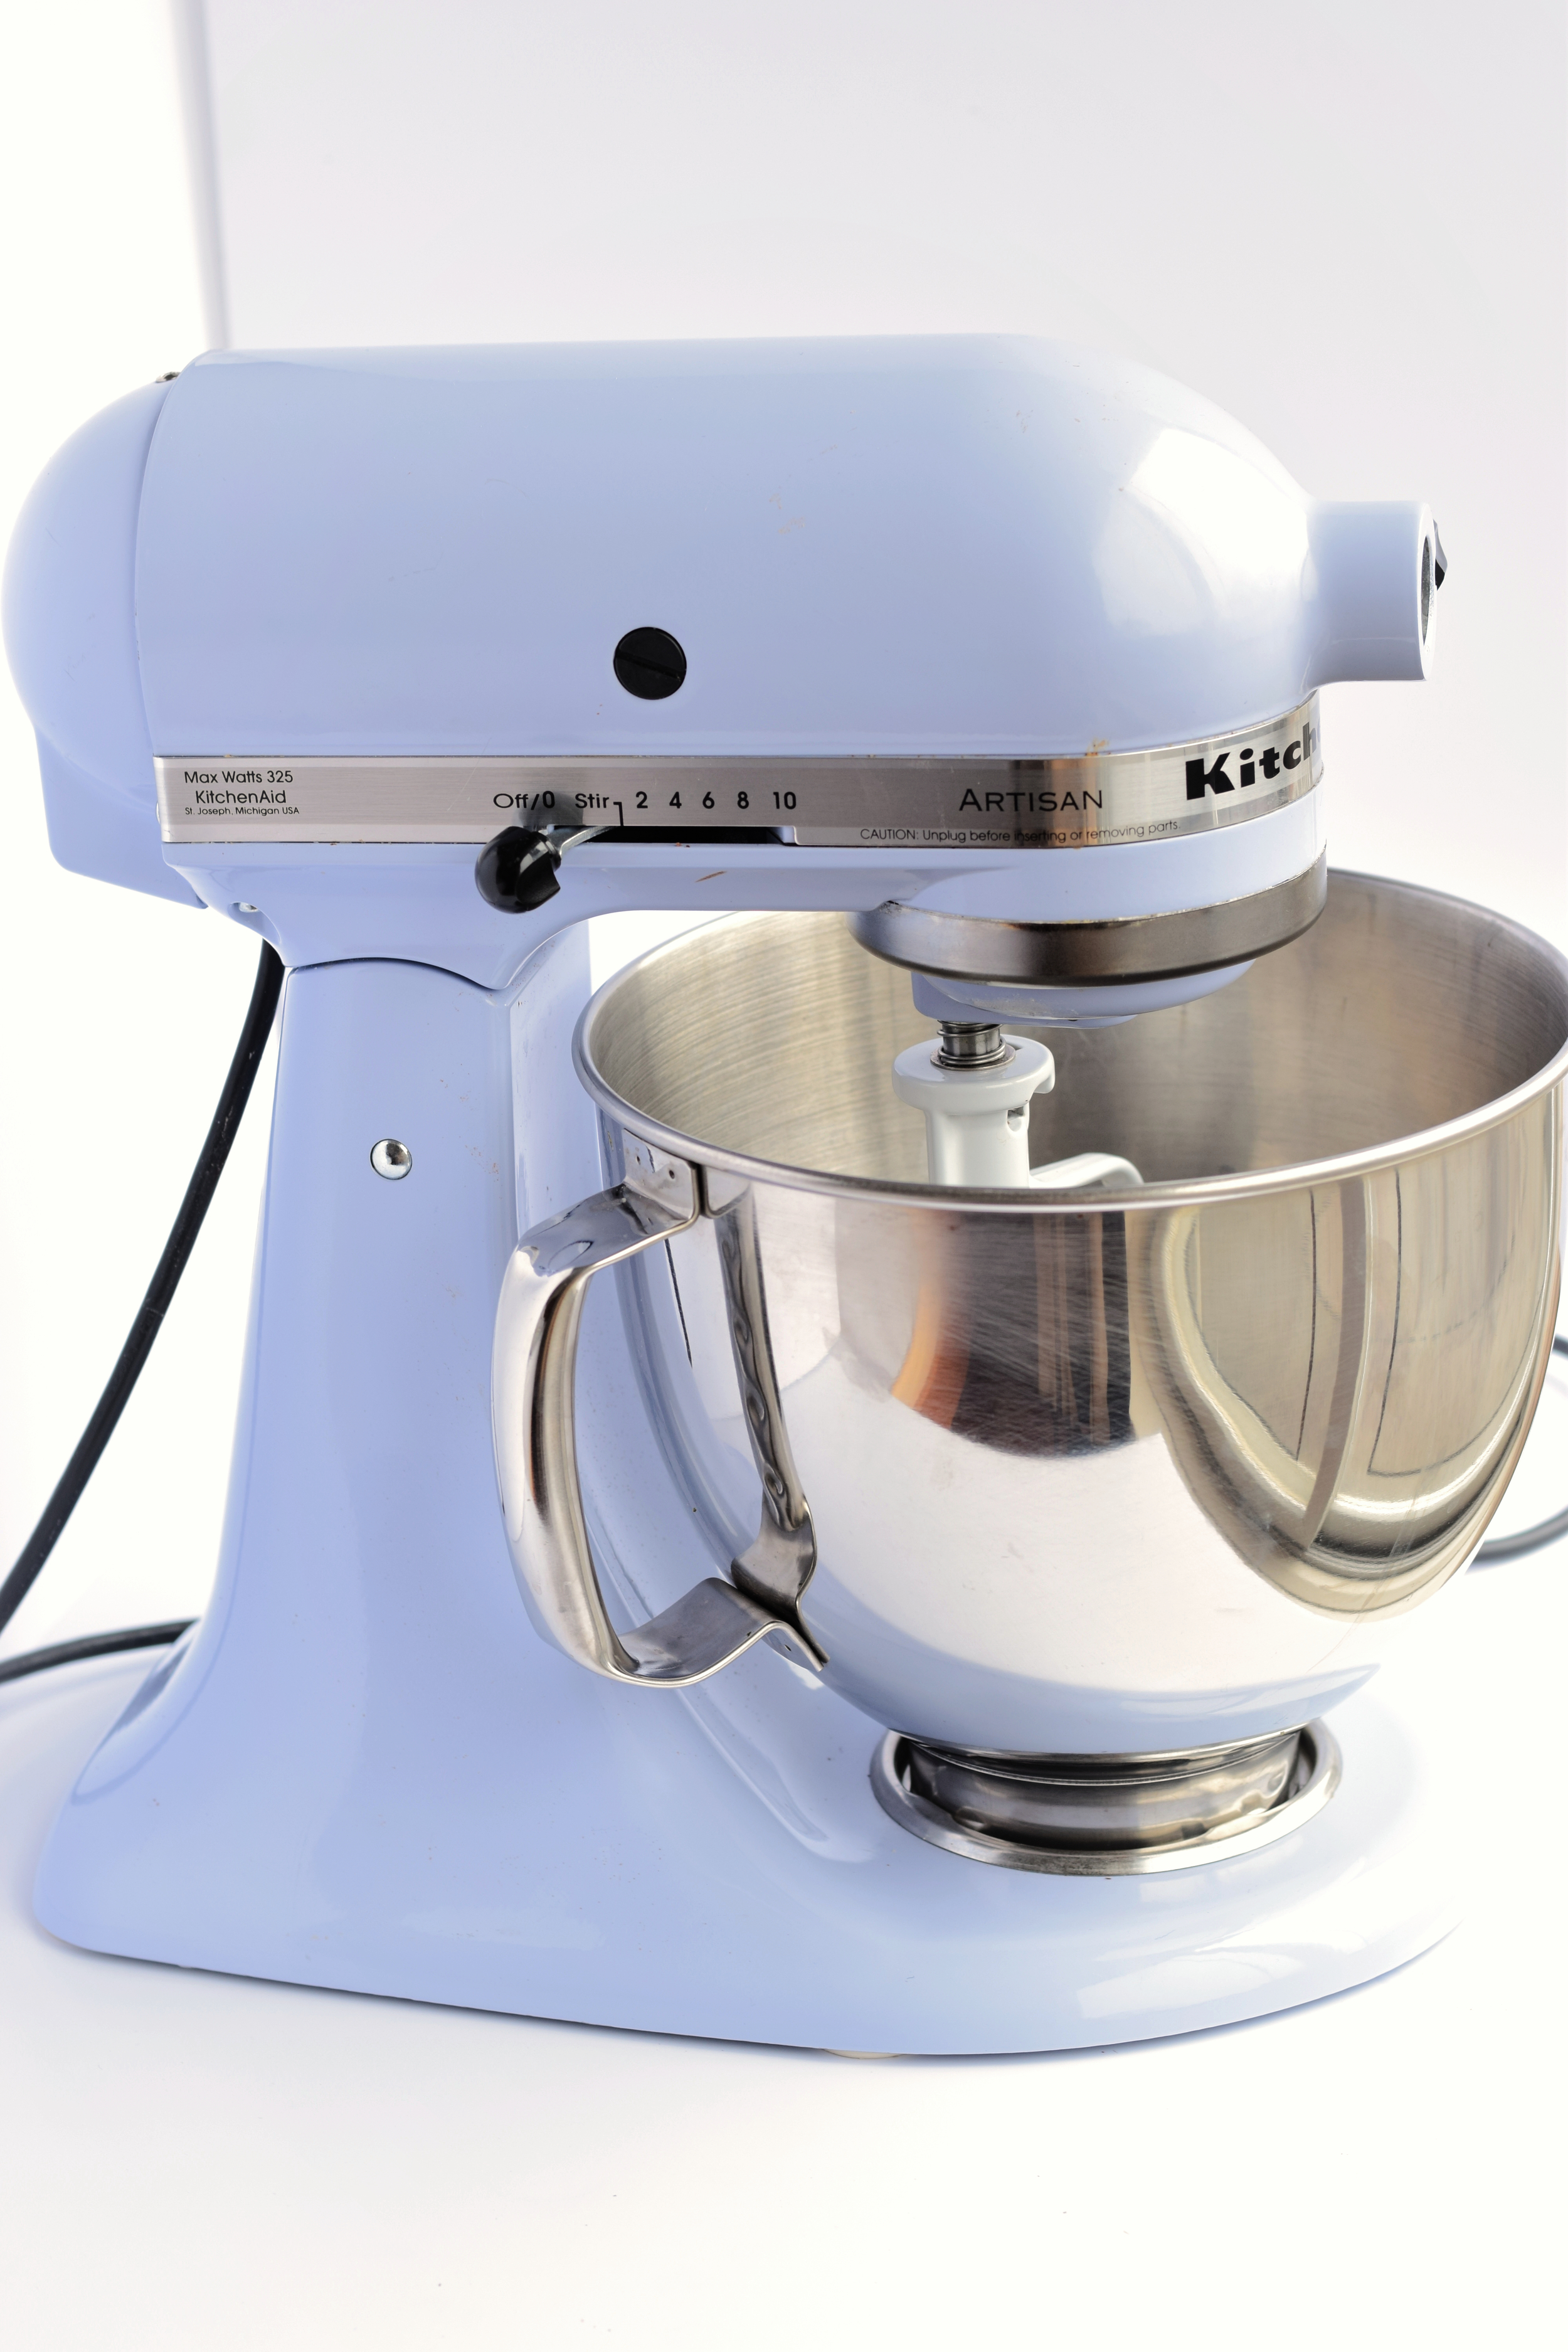 10 Must-Have Baking Essentials for Mom